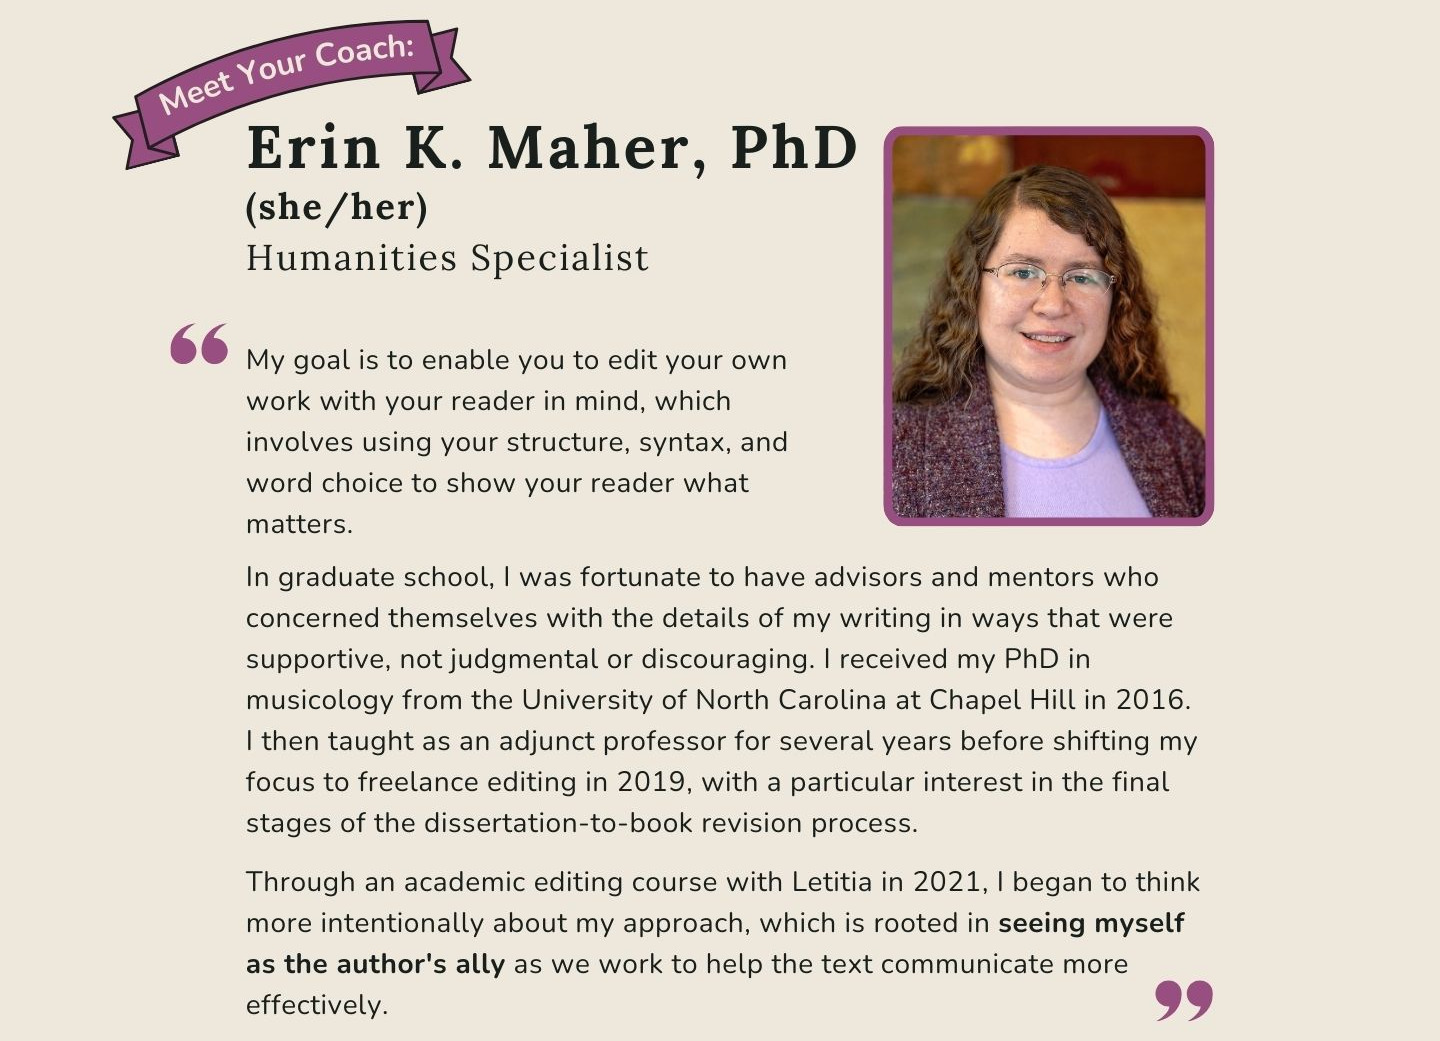 Meet Your Coach: Erin K. Maher, PhD. My goal is to enable you to edit your own work with the reader in mind, which involves using your paragraph structure, syntax, and word choice to show them what mattes.